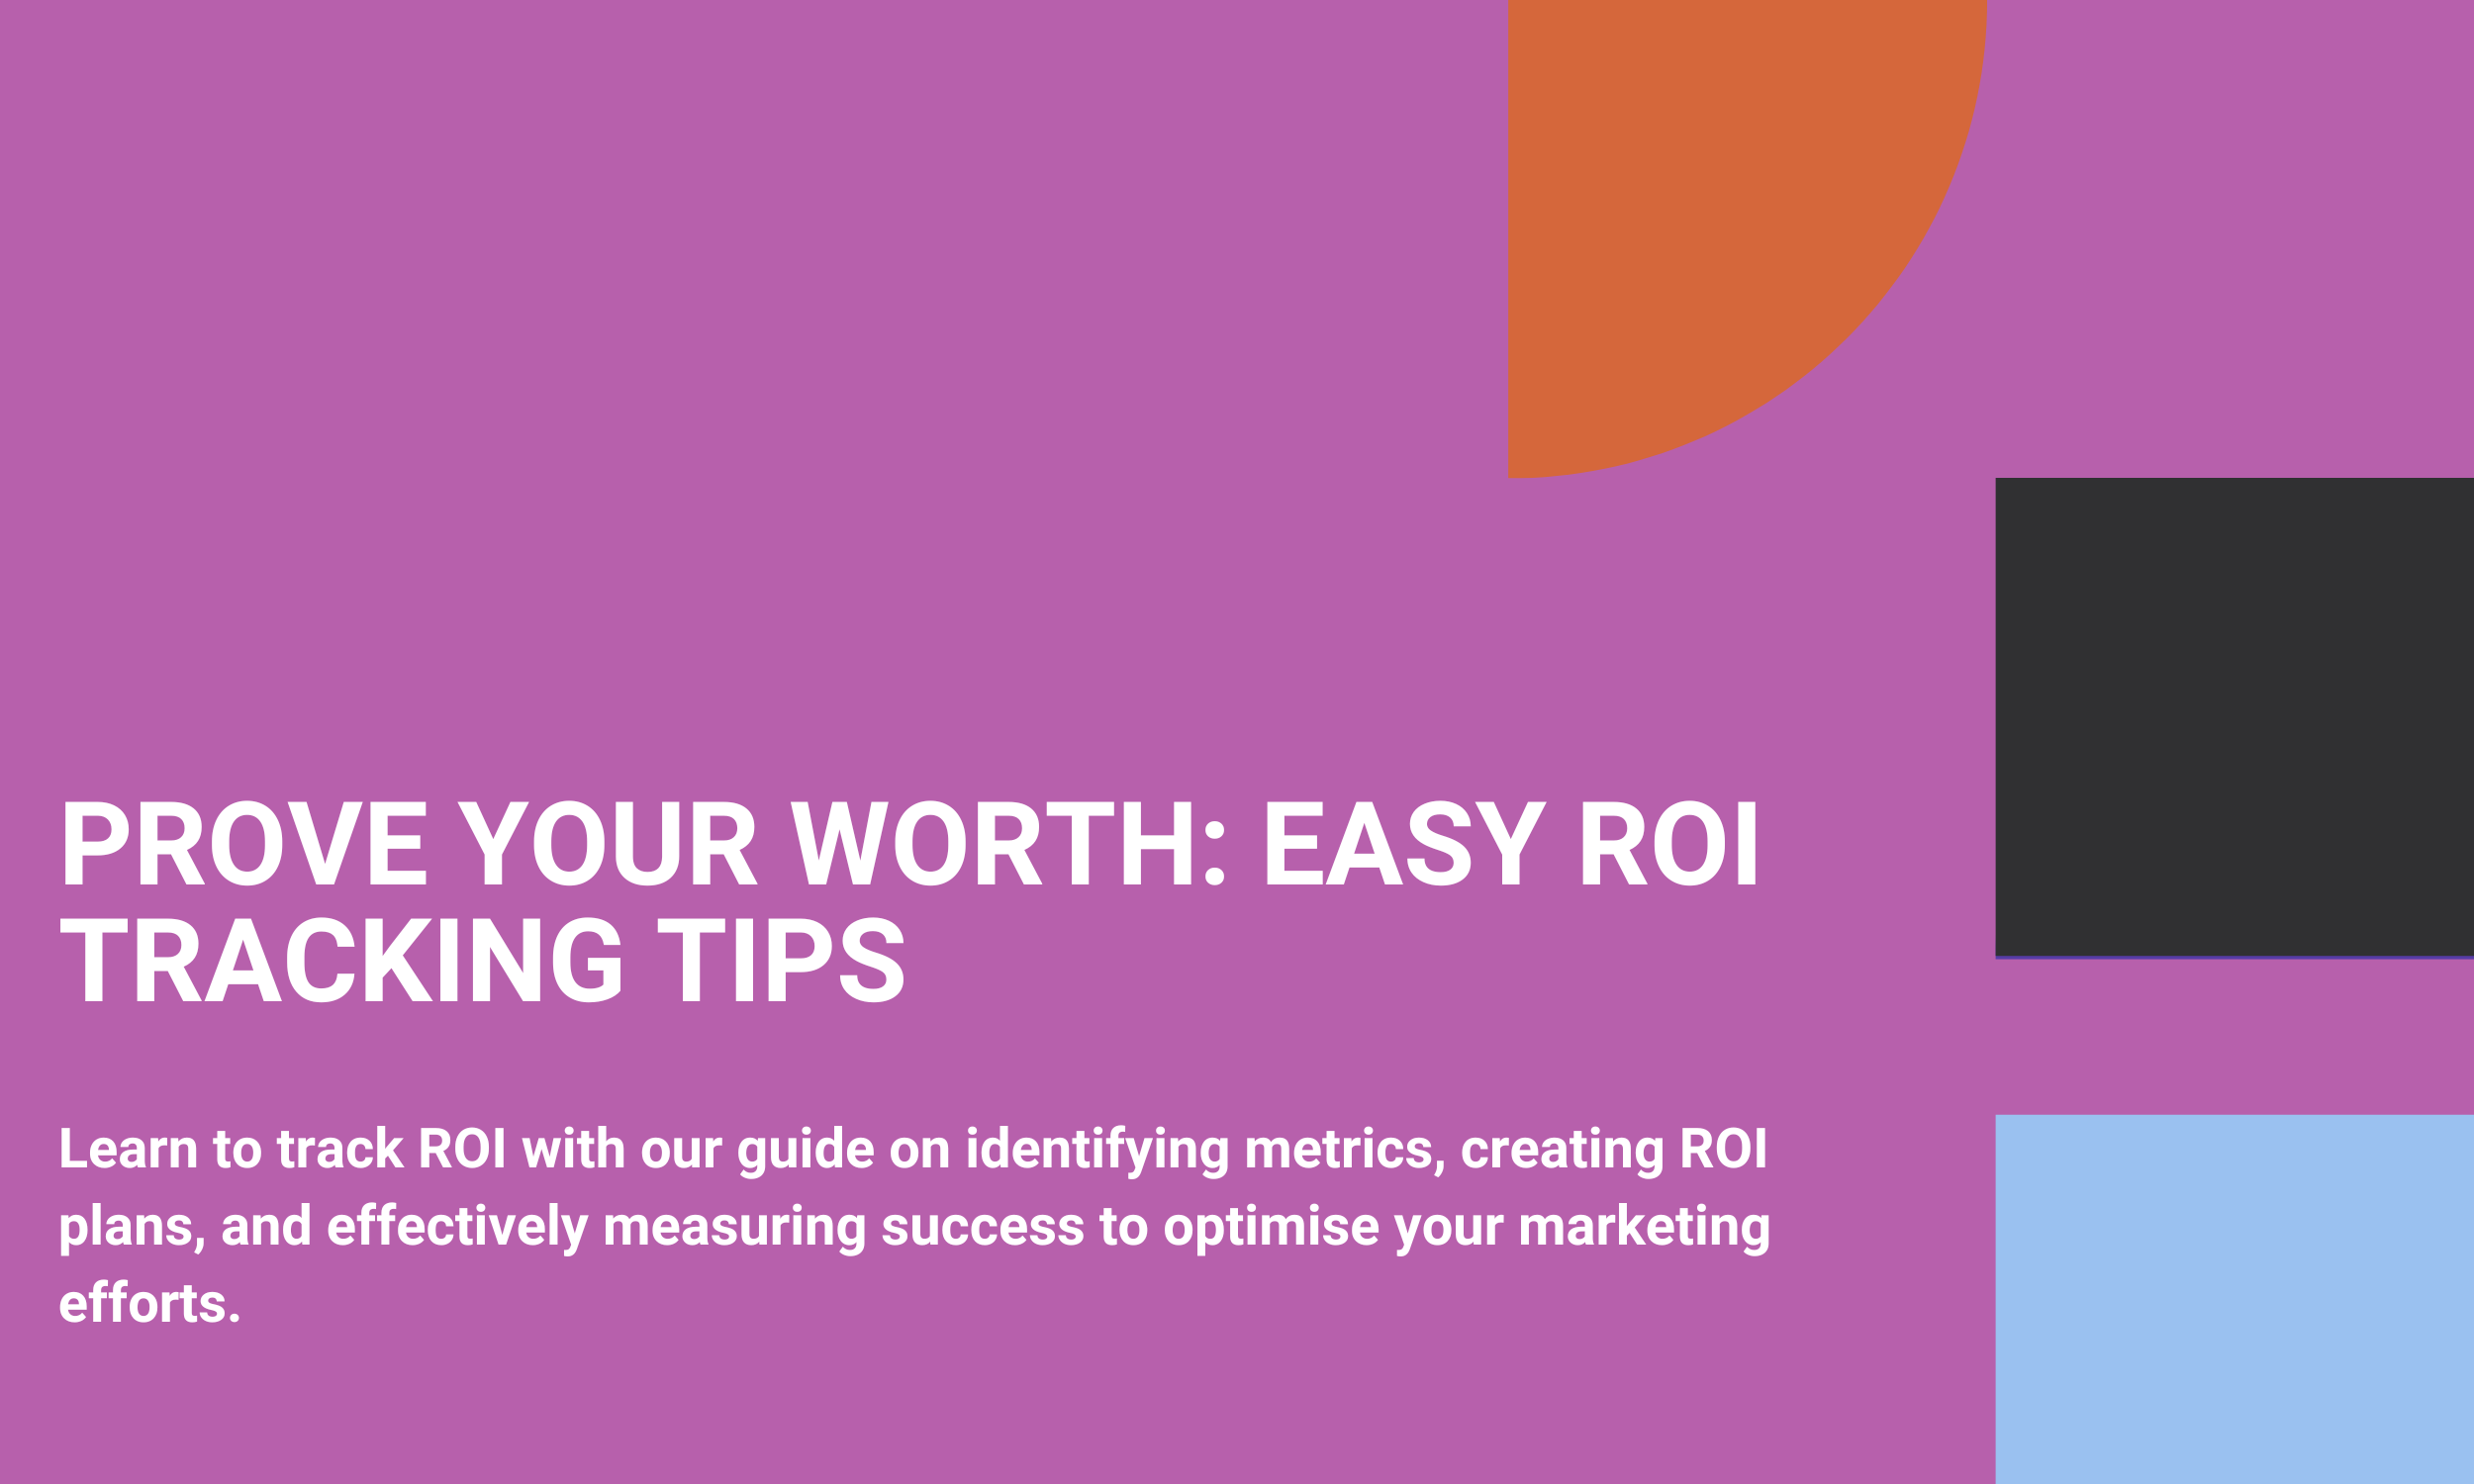 Learn to track ROI with our guide on identifying metrics, creating ROI plans, and effectively measuring success to optimise your marketing efforts.